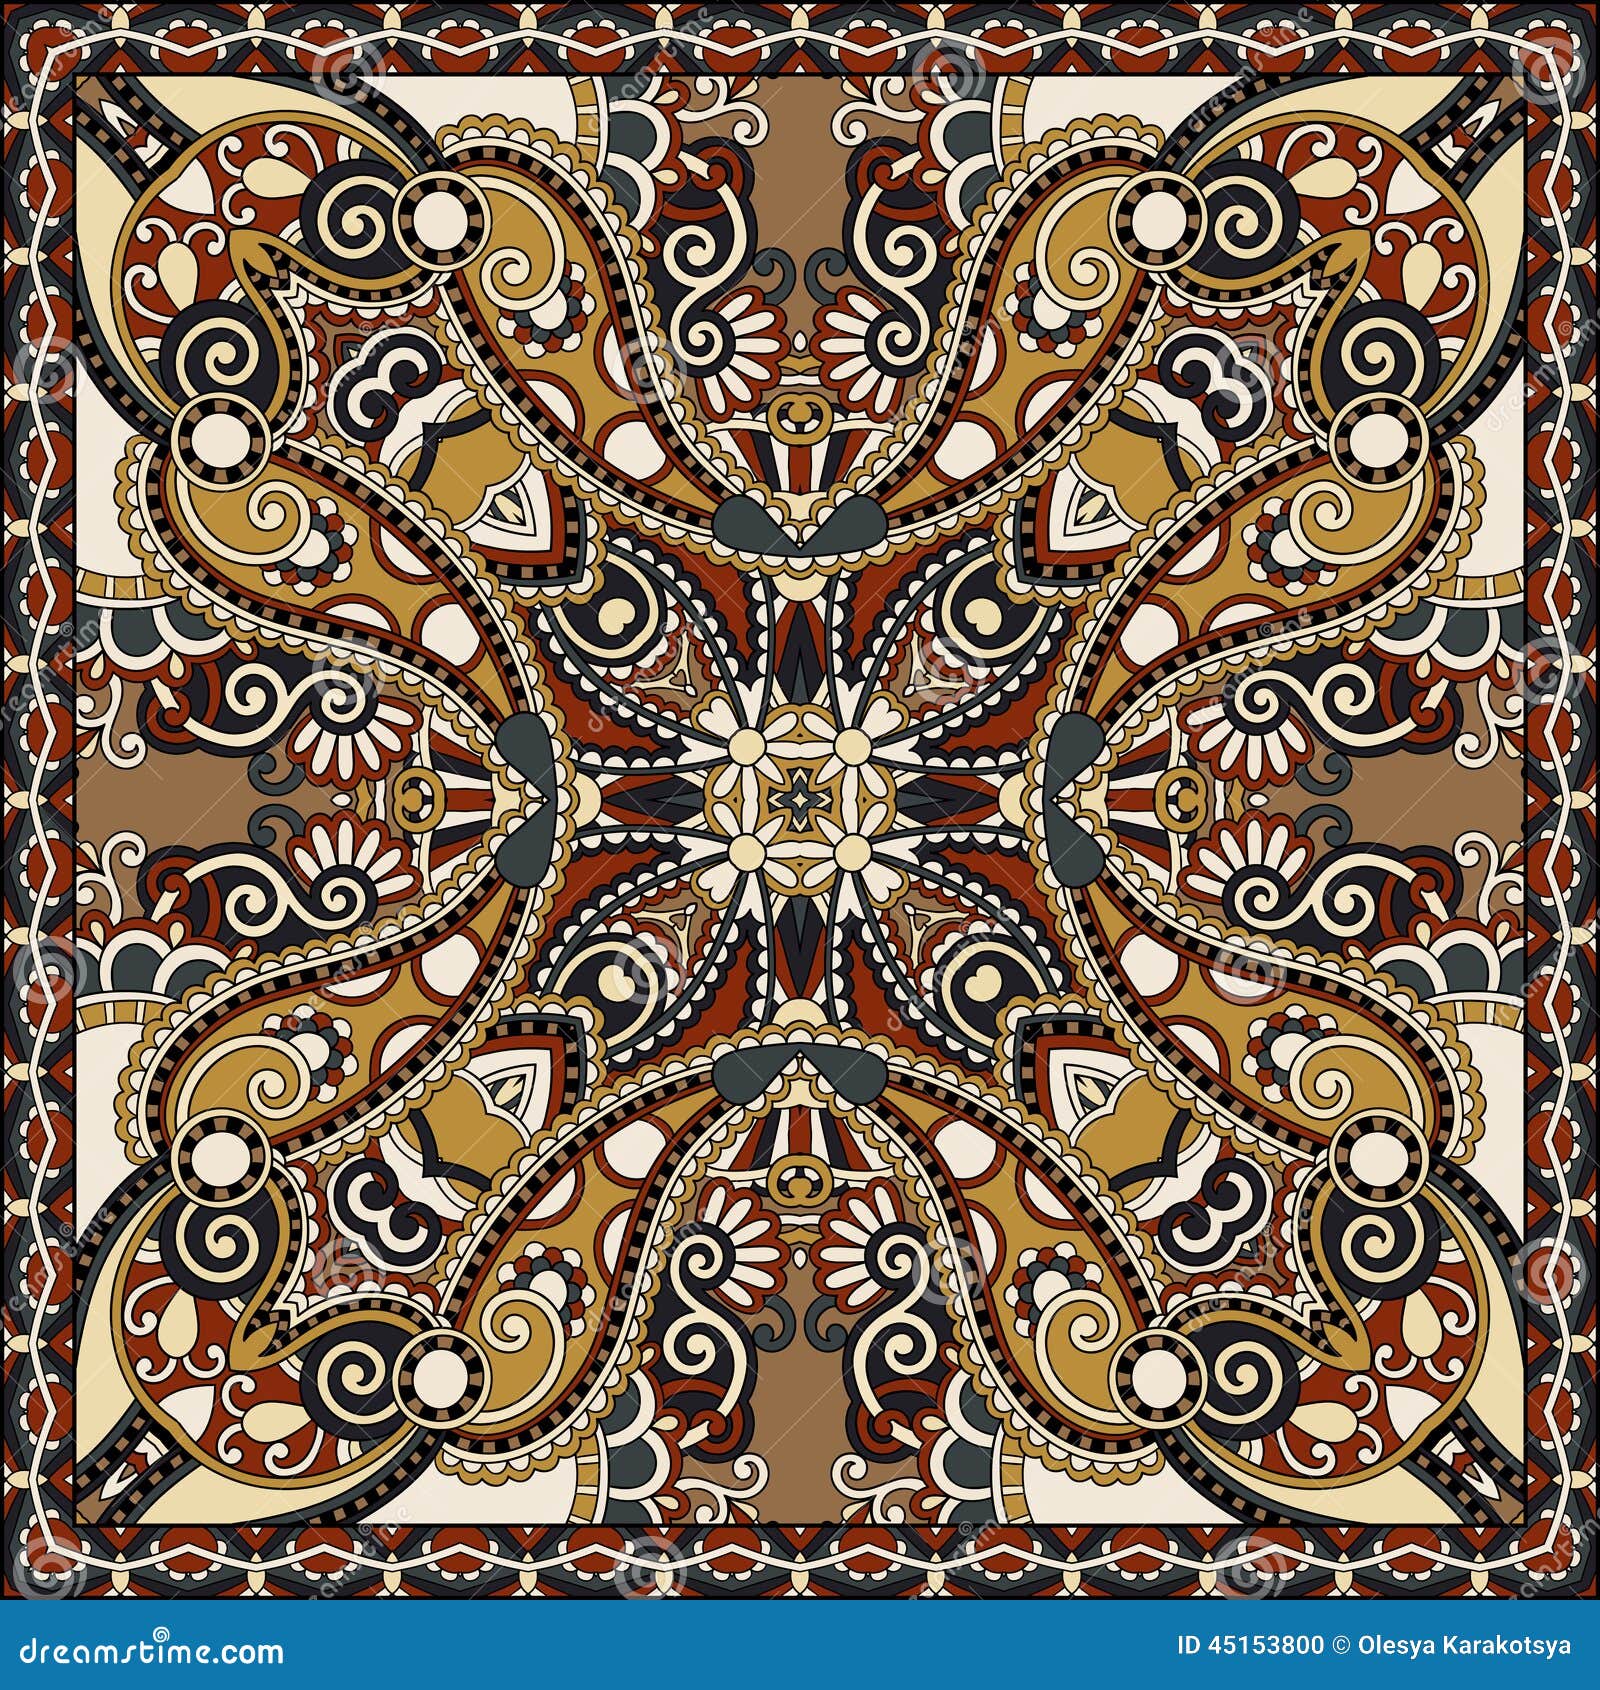 Traditional ornamental floral paisley bandanna. You can use this pattern in the design of carpet, shawl, pillow, cushion